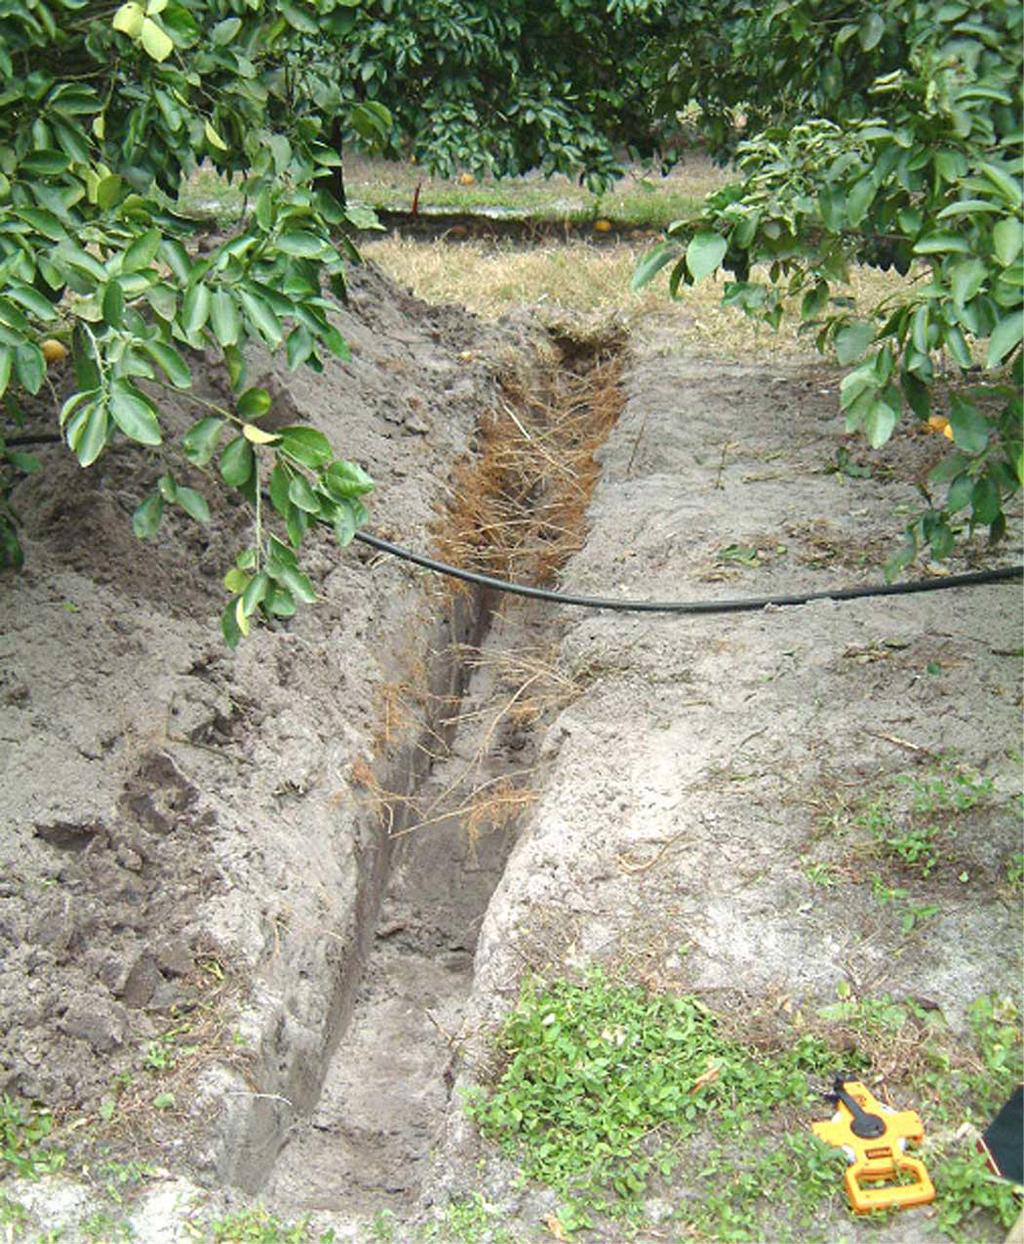 Root system and canopy condition of 11-year-old Marsh grapefruit trees on Sun Chu Sha growing adjacent to the poor trees on Swingle. The view is from the furrow toward the bed crown.